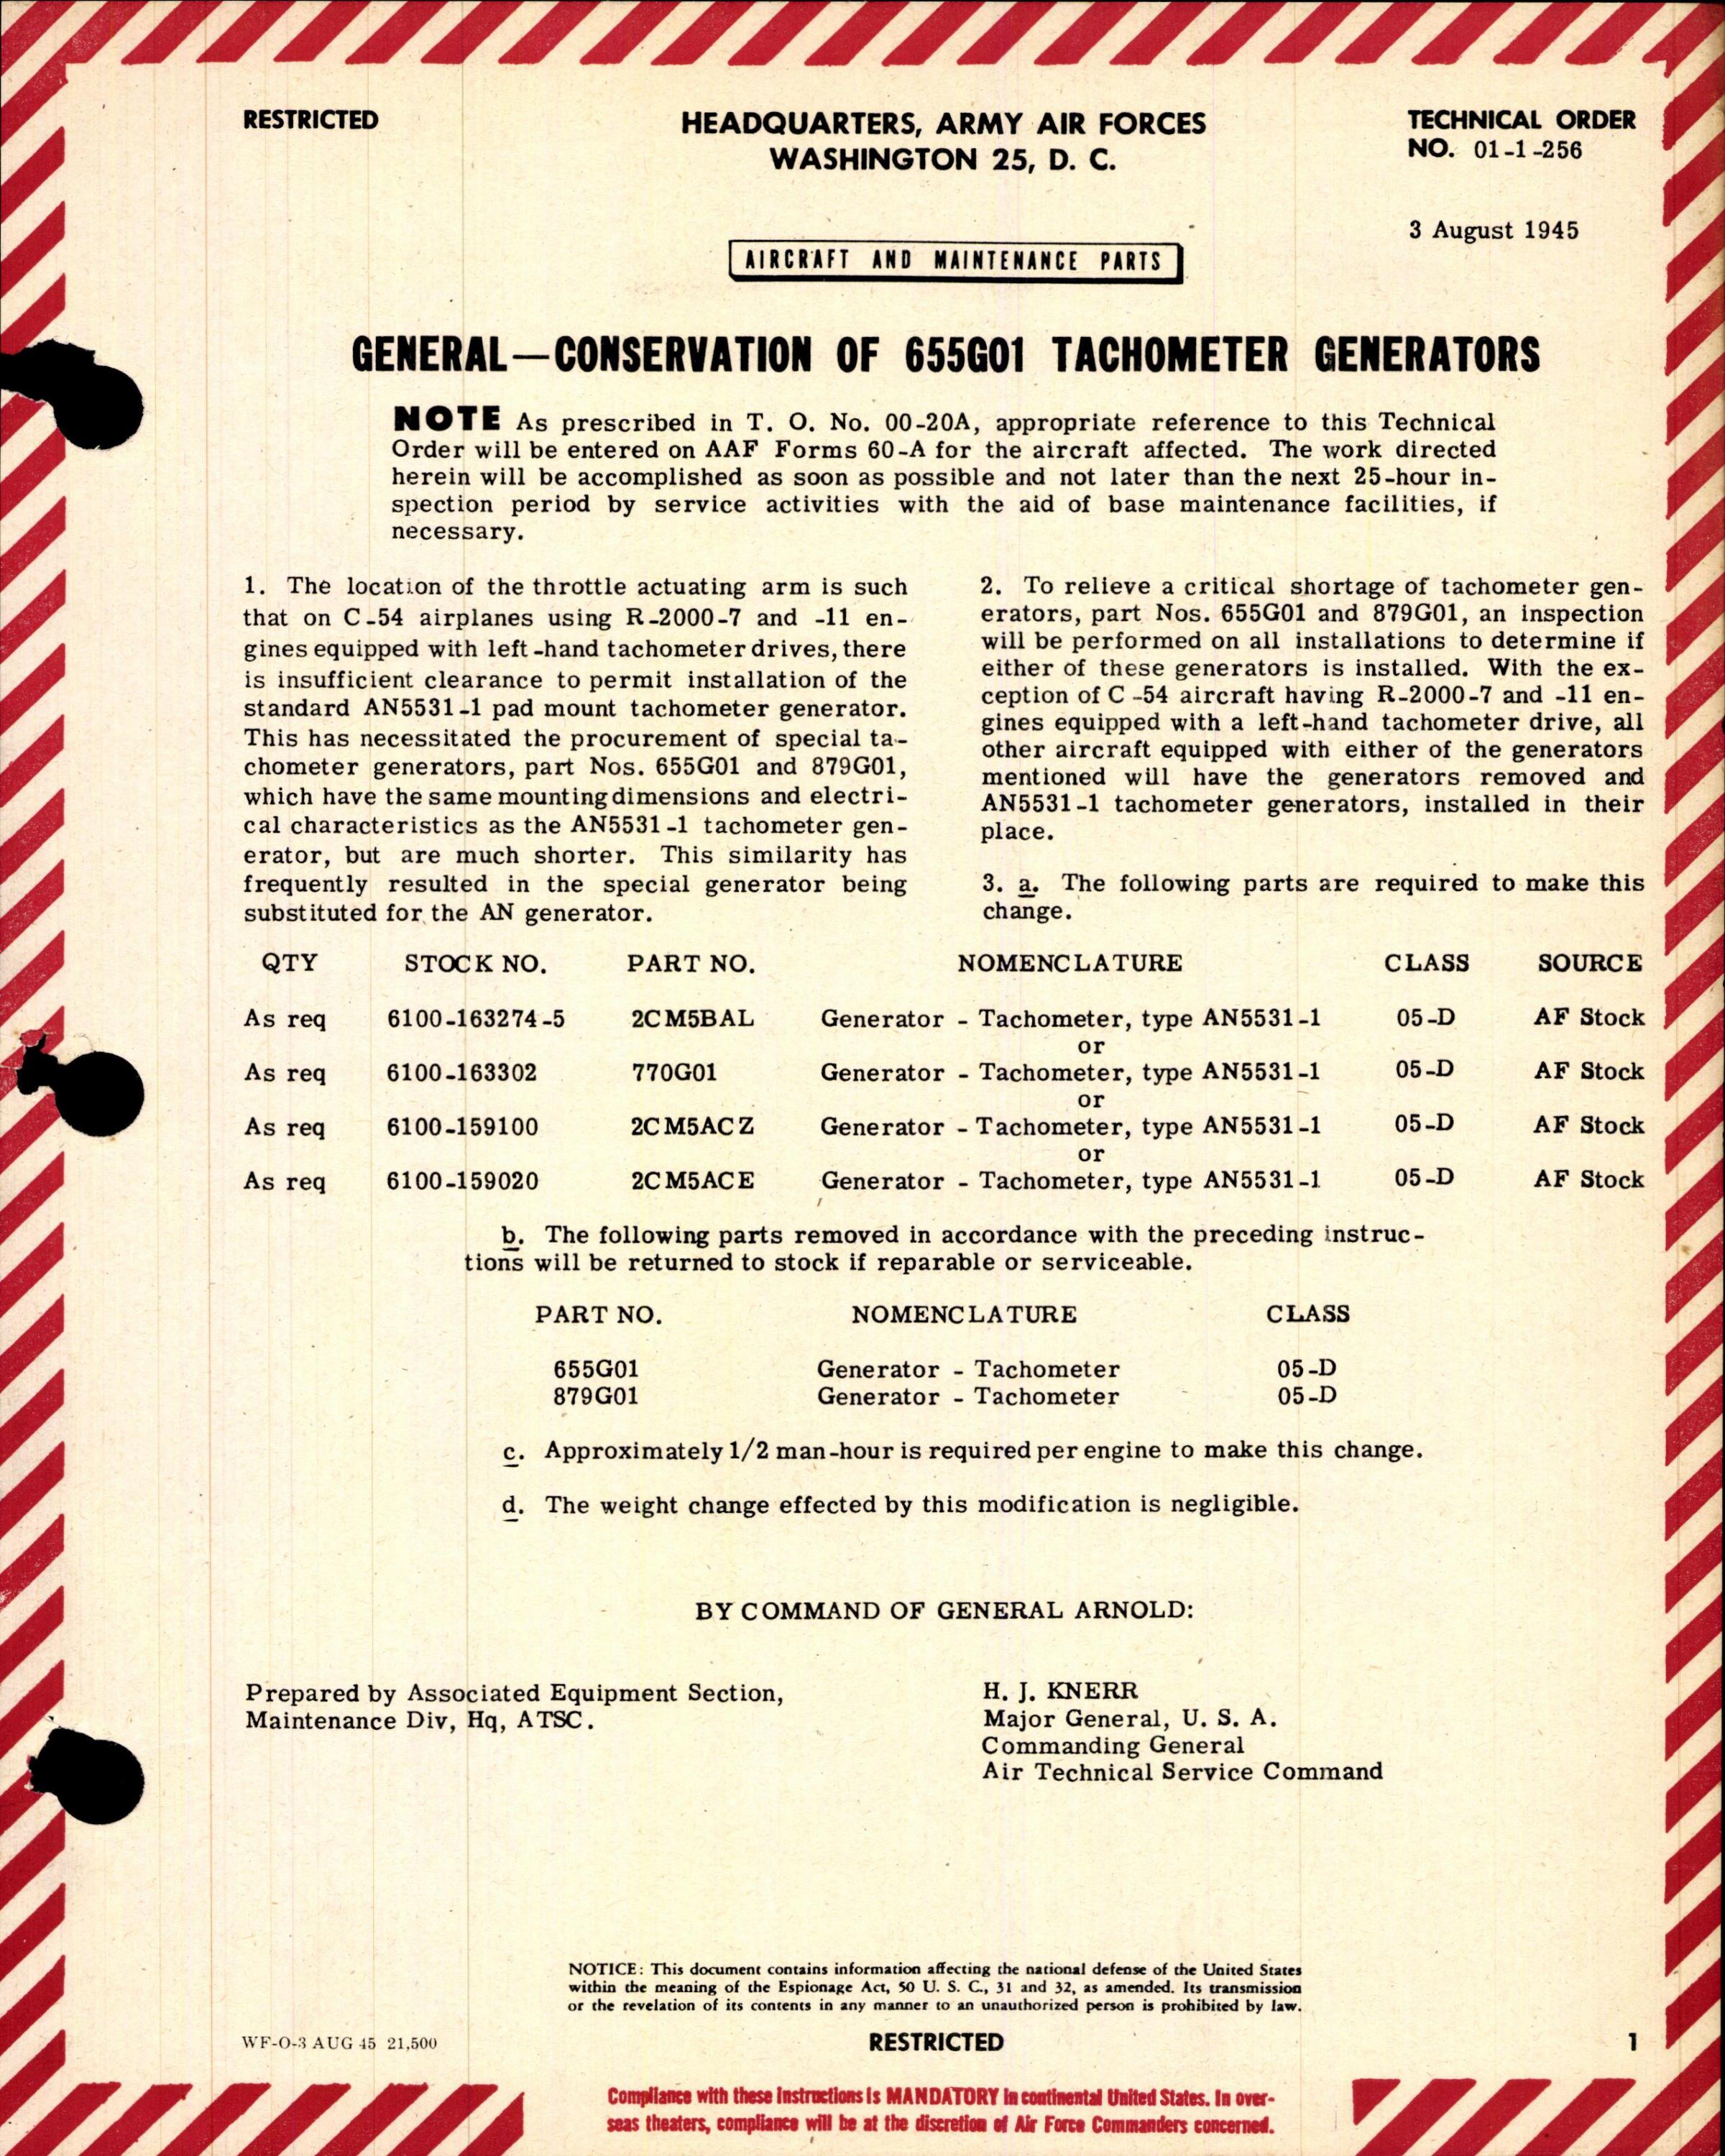 Sample page 1 from AirCorps Library document: Conservation of 655G01 Tachometer Generators